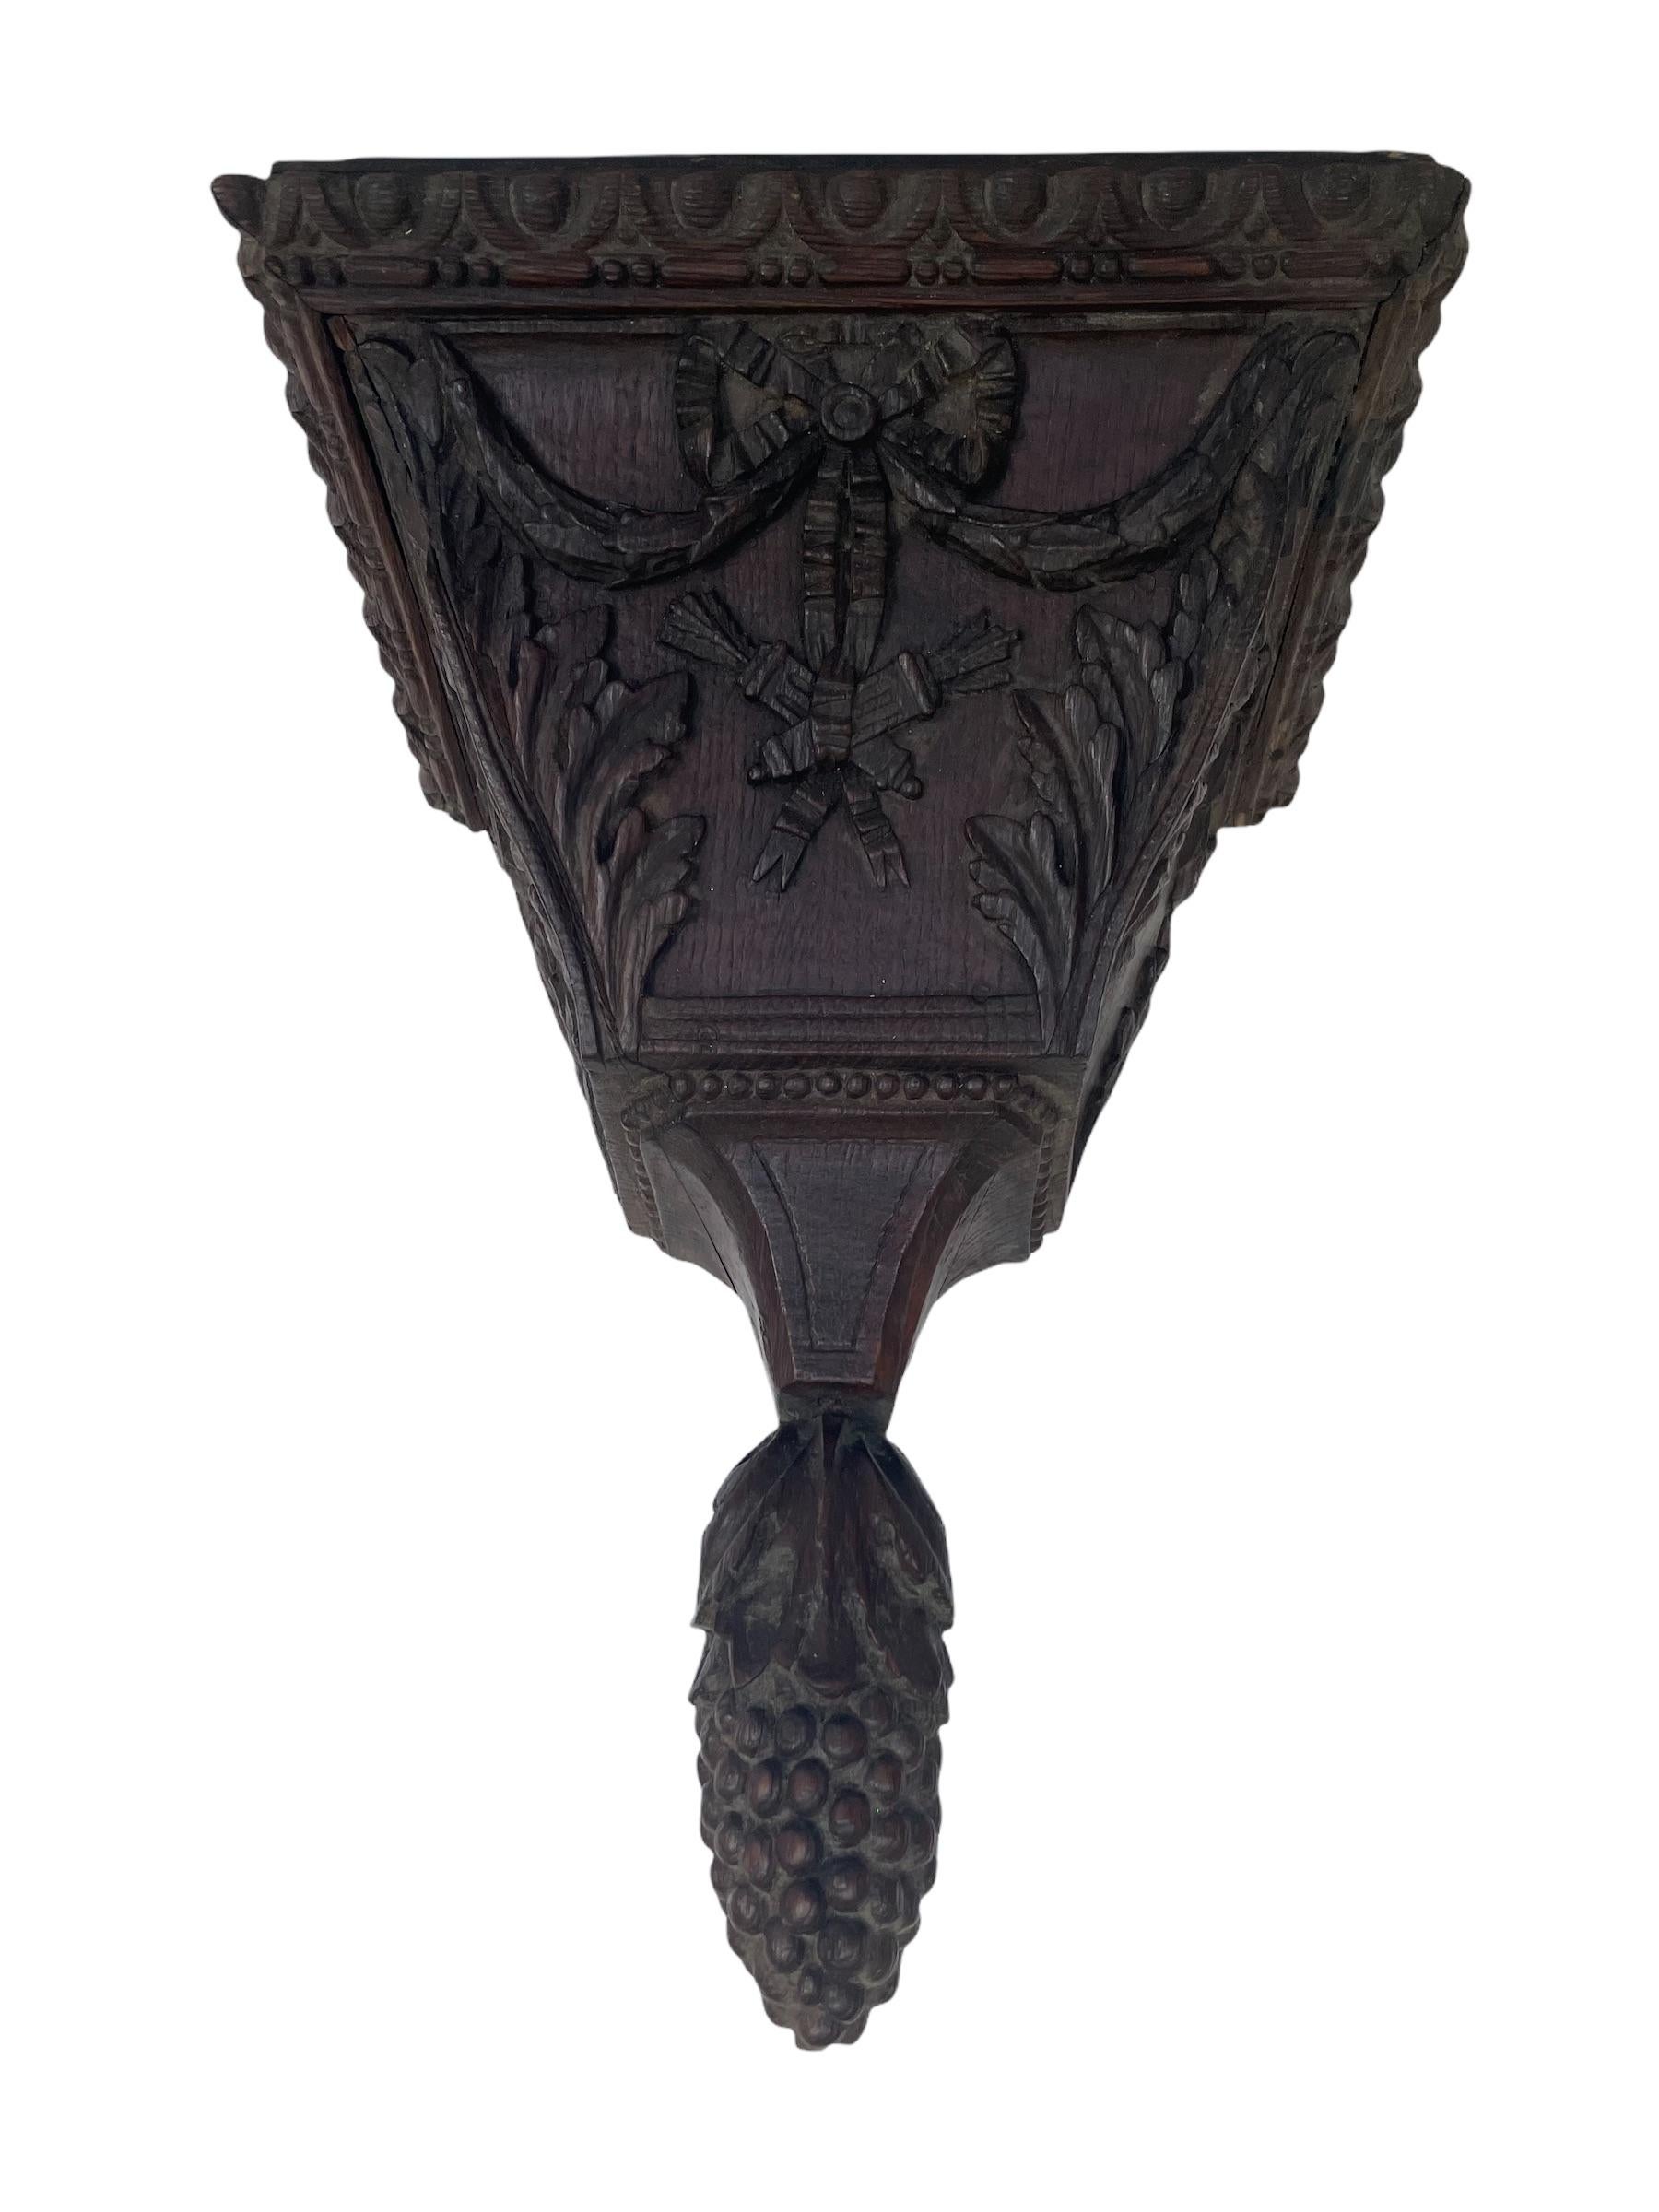 French wooden console decorated with carved bows and ribbons.